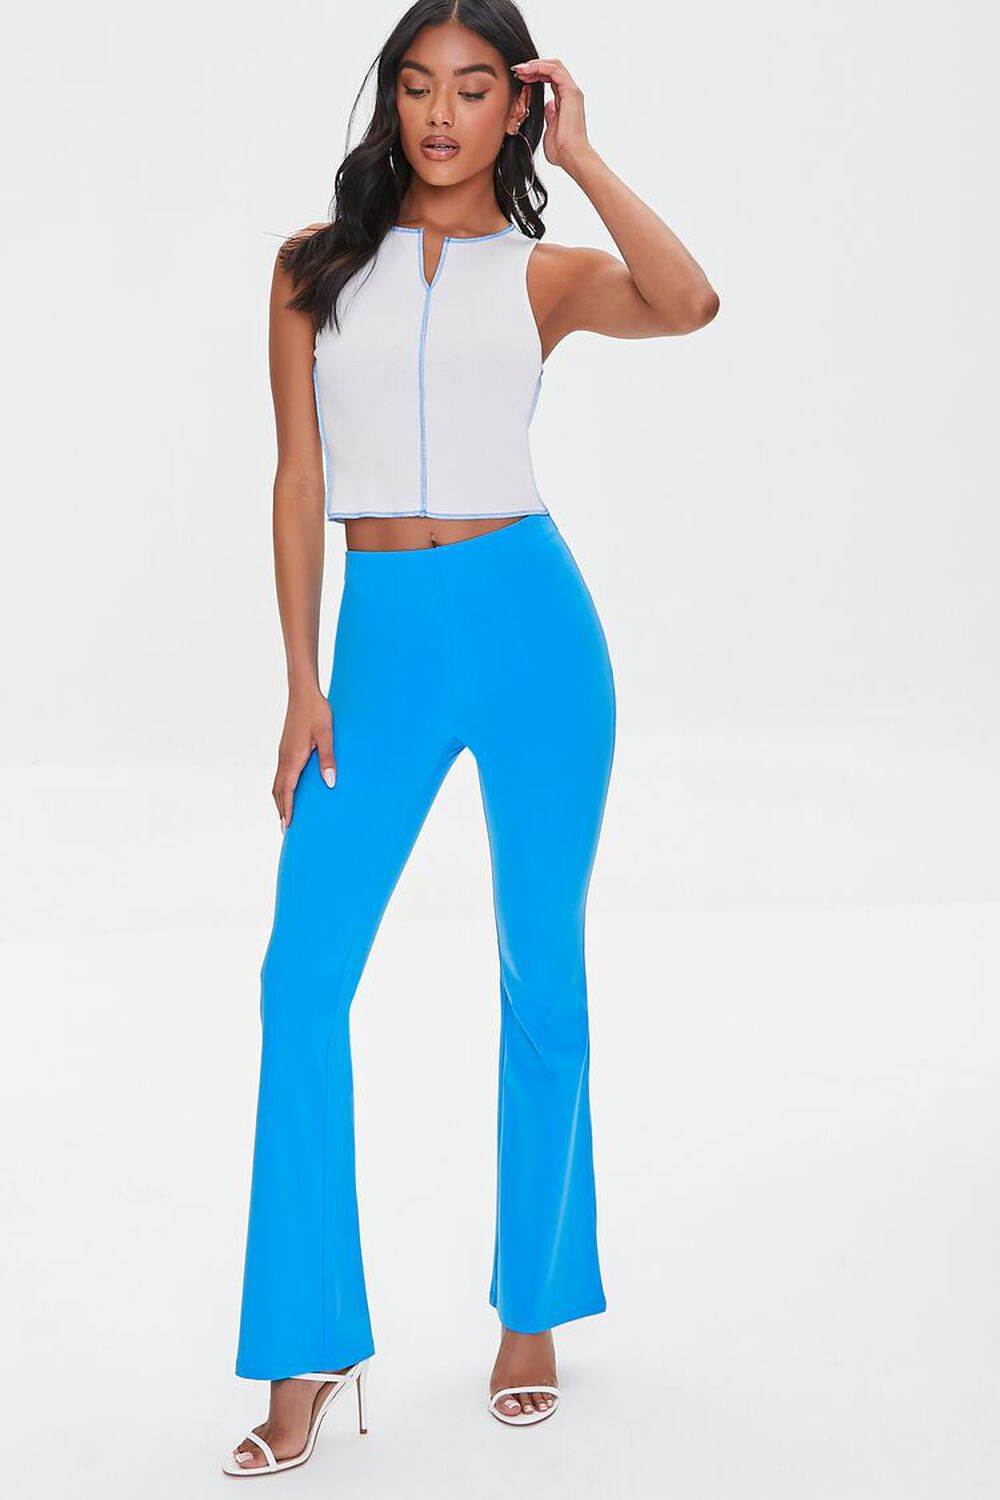 PEACOCK Flare High-Rise Pants, image 1